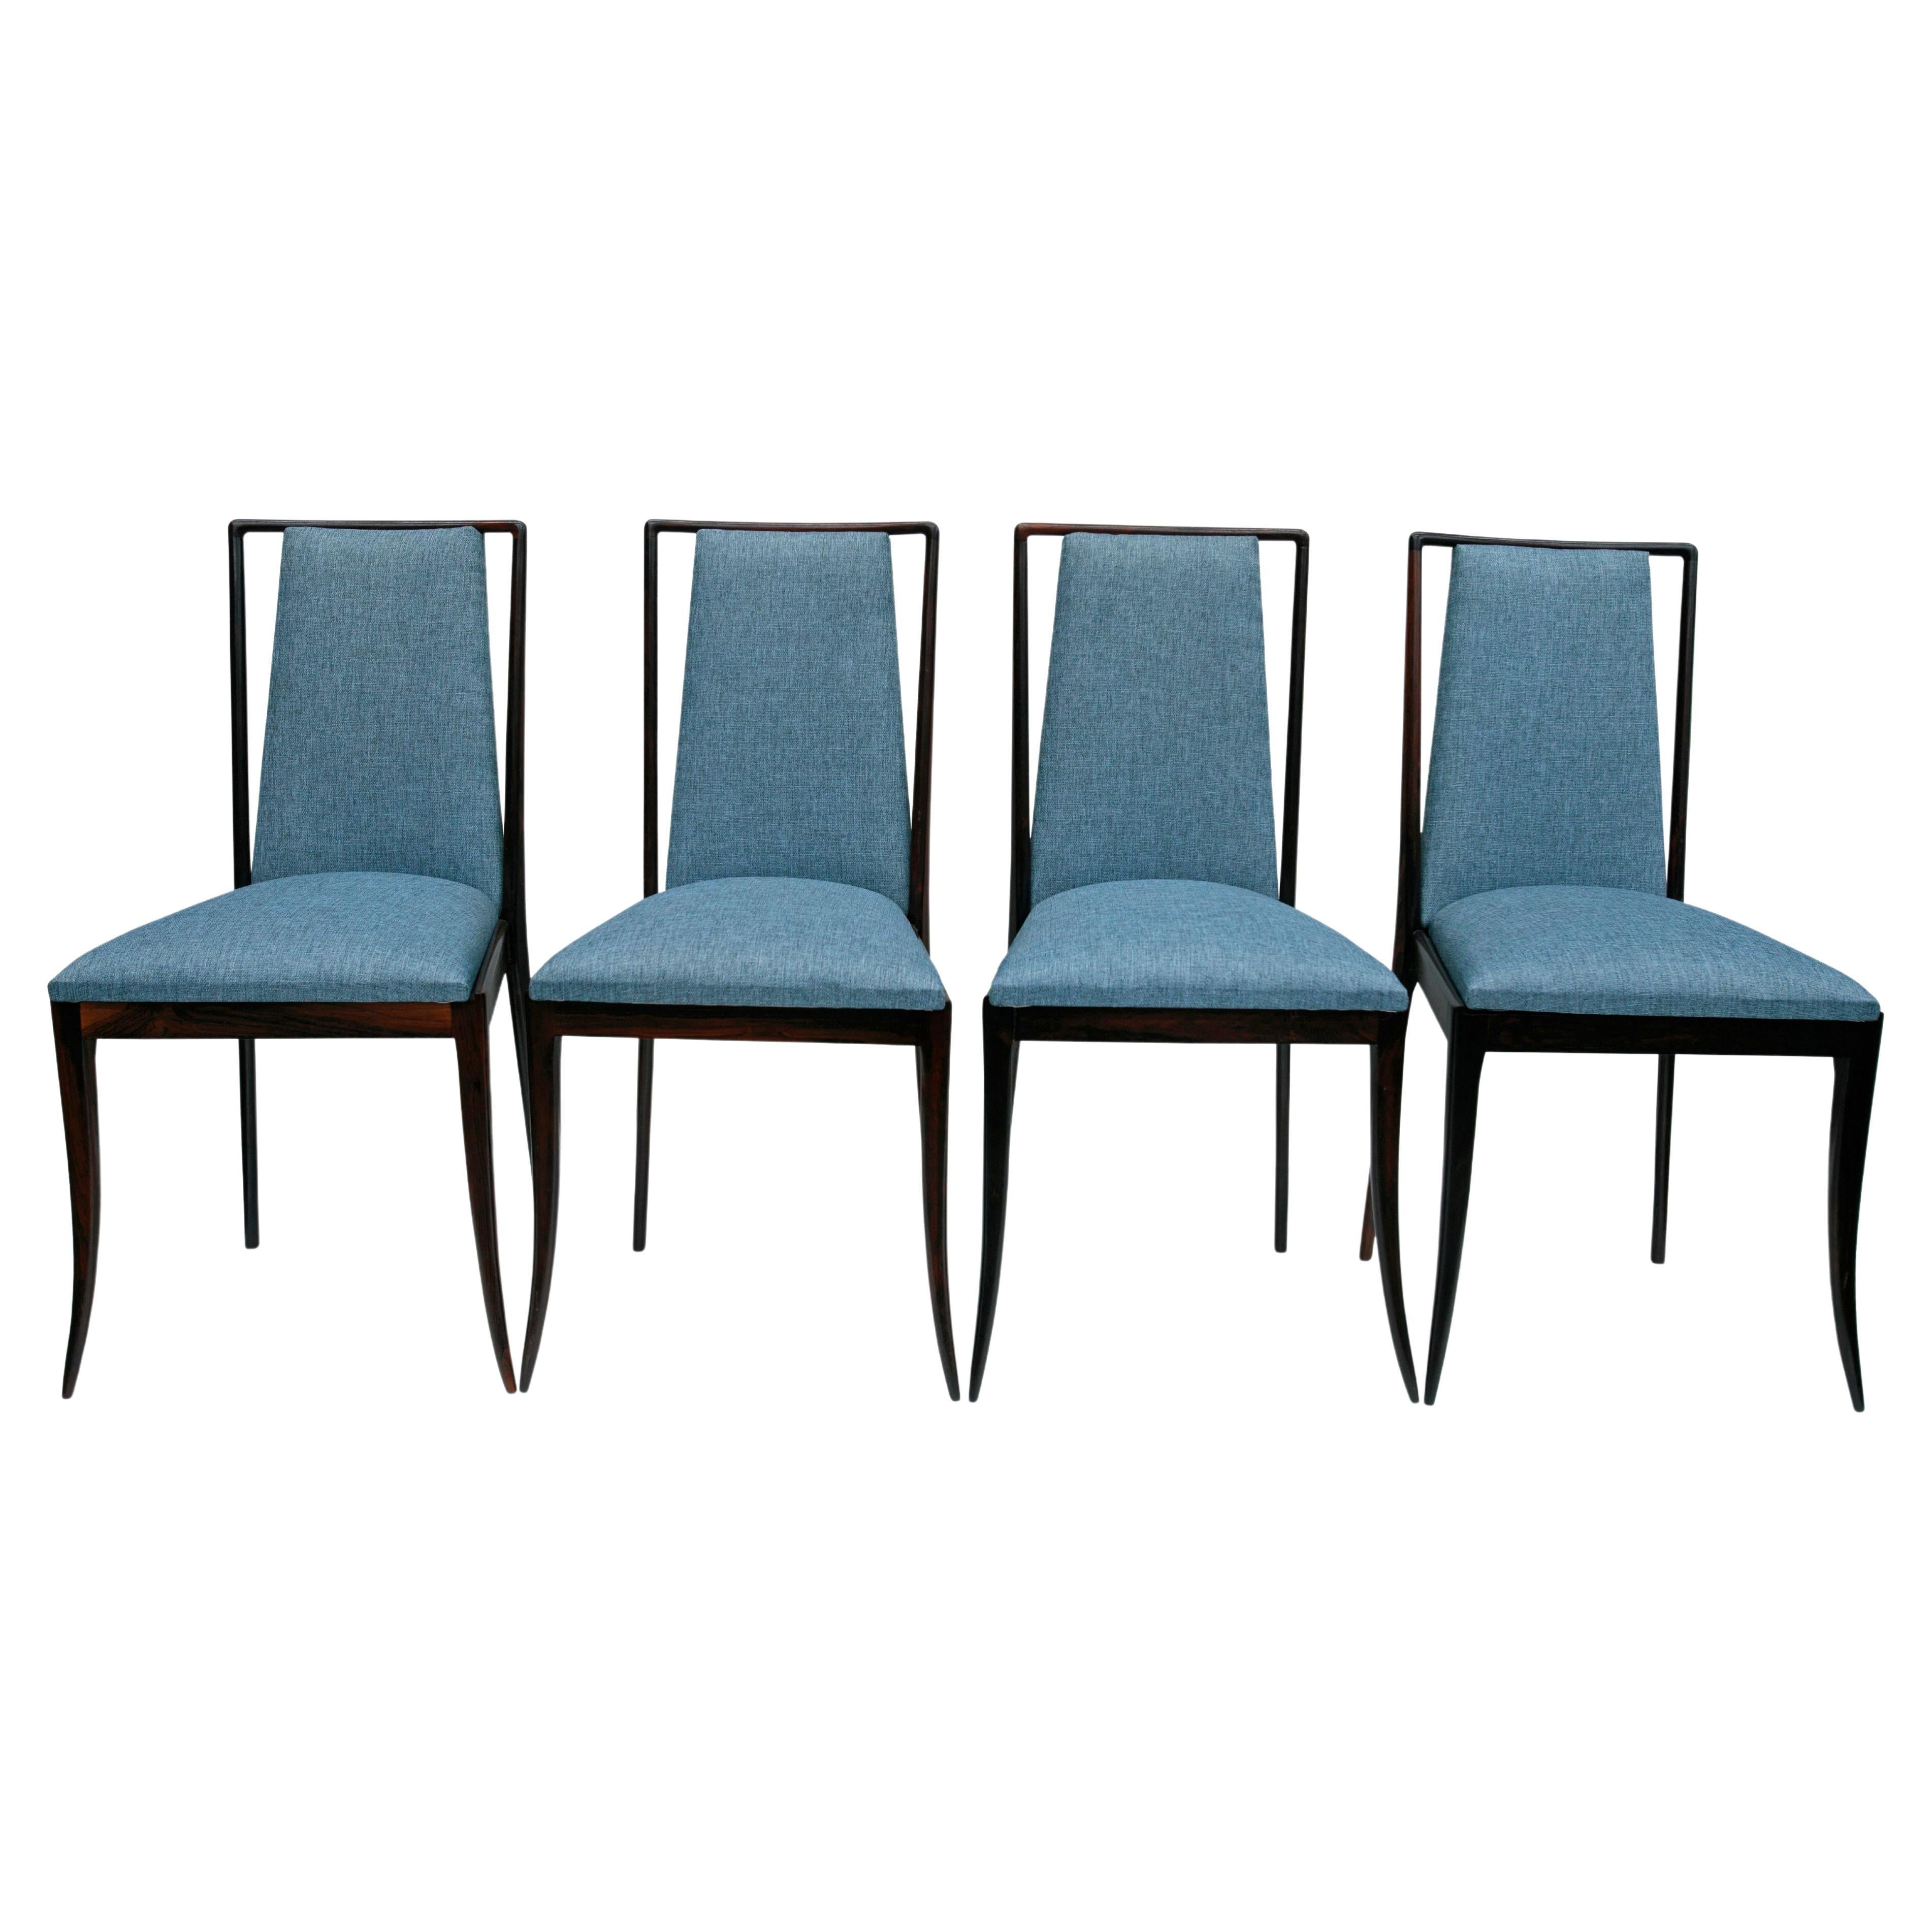 Brazilian Modern 4 Chair Set in Hardwood & Blue Fabric by G. Scapinelli, Brazi For Sale